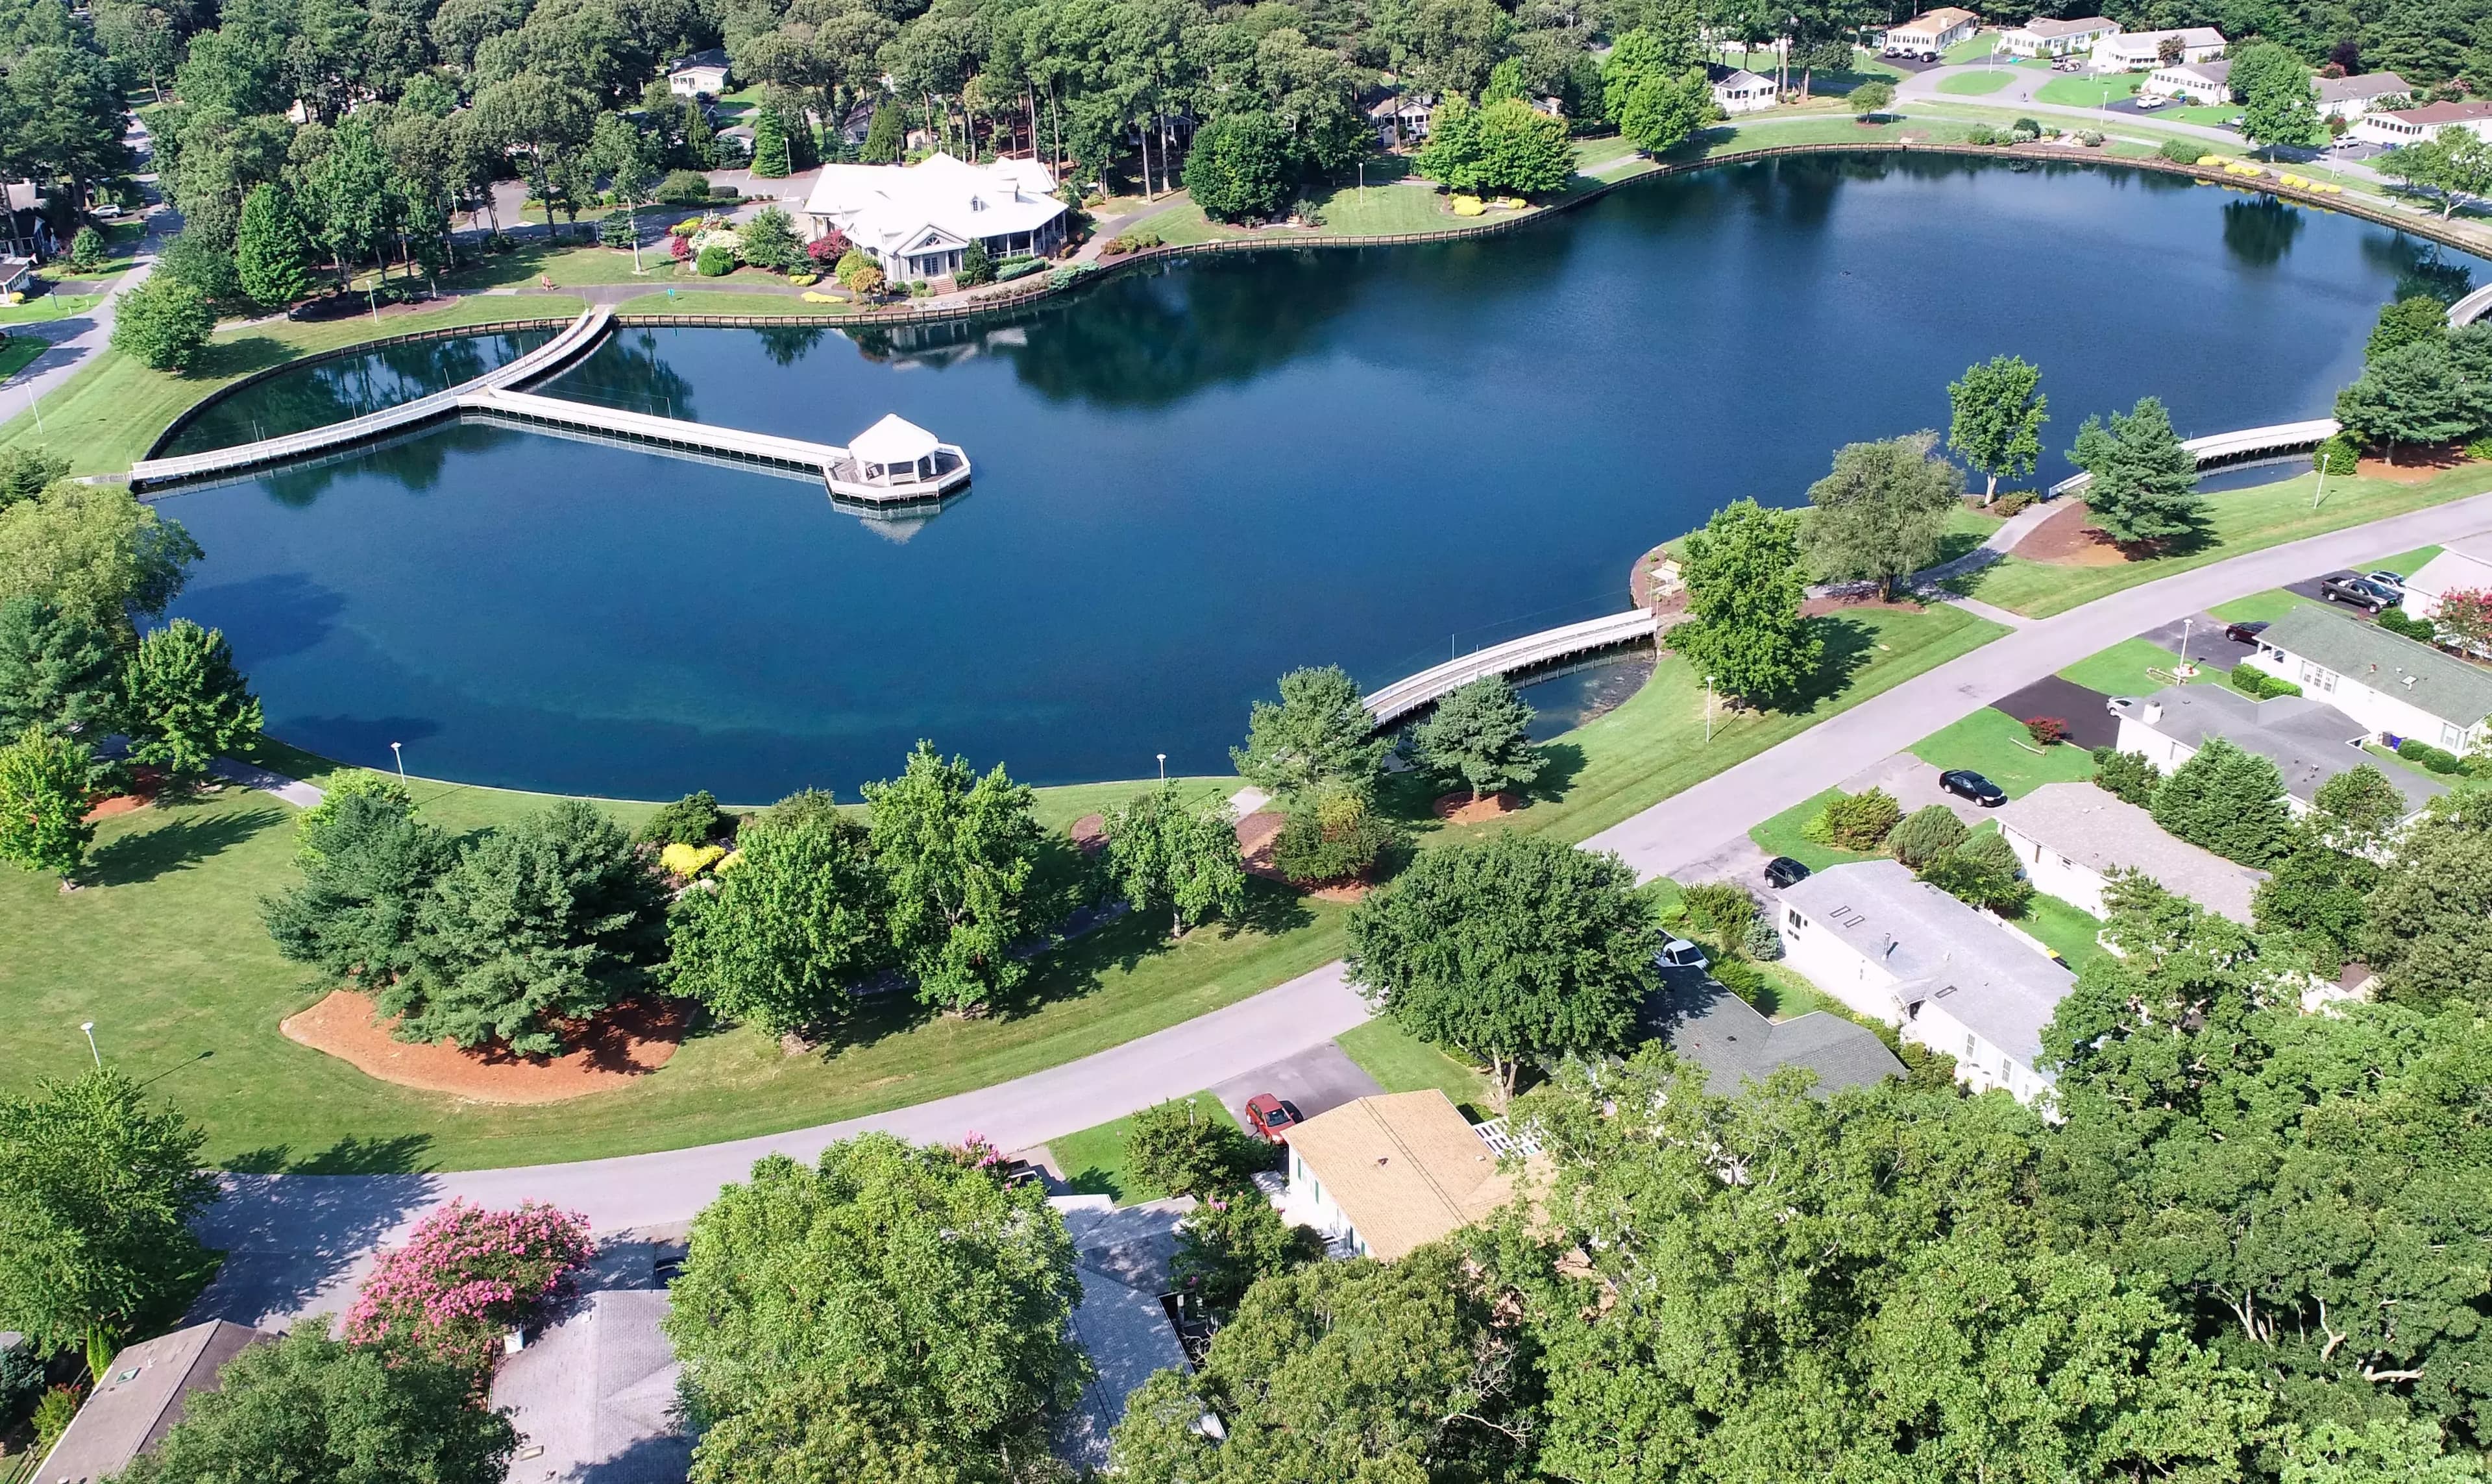 Pot-Nets Lakeside features expansive open space and a beautiful lake that serves as the community centerpiece.